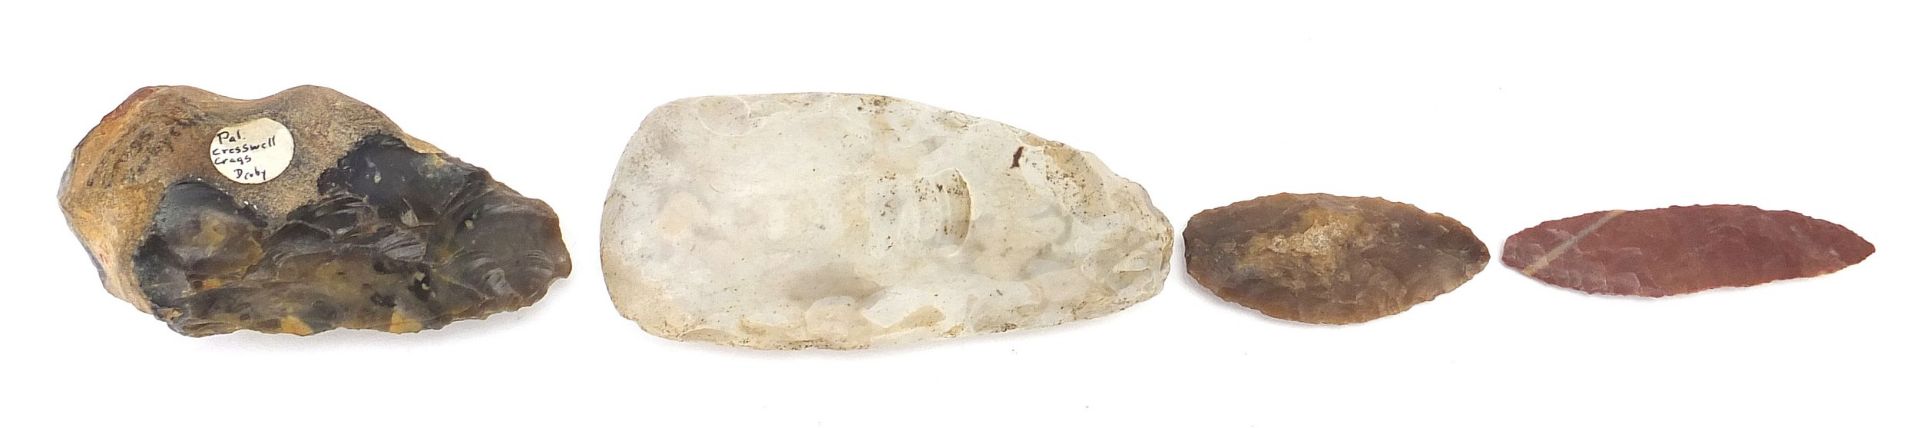 Four antique flint axe heads, the largest 15.5cm in length - Image 6 of 6